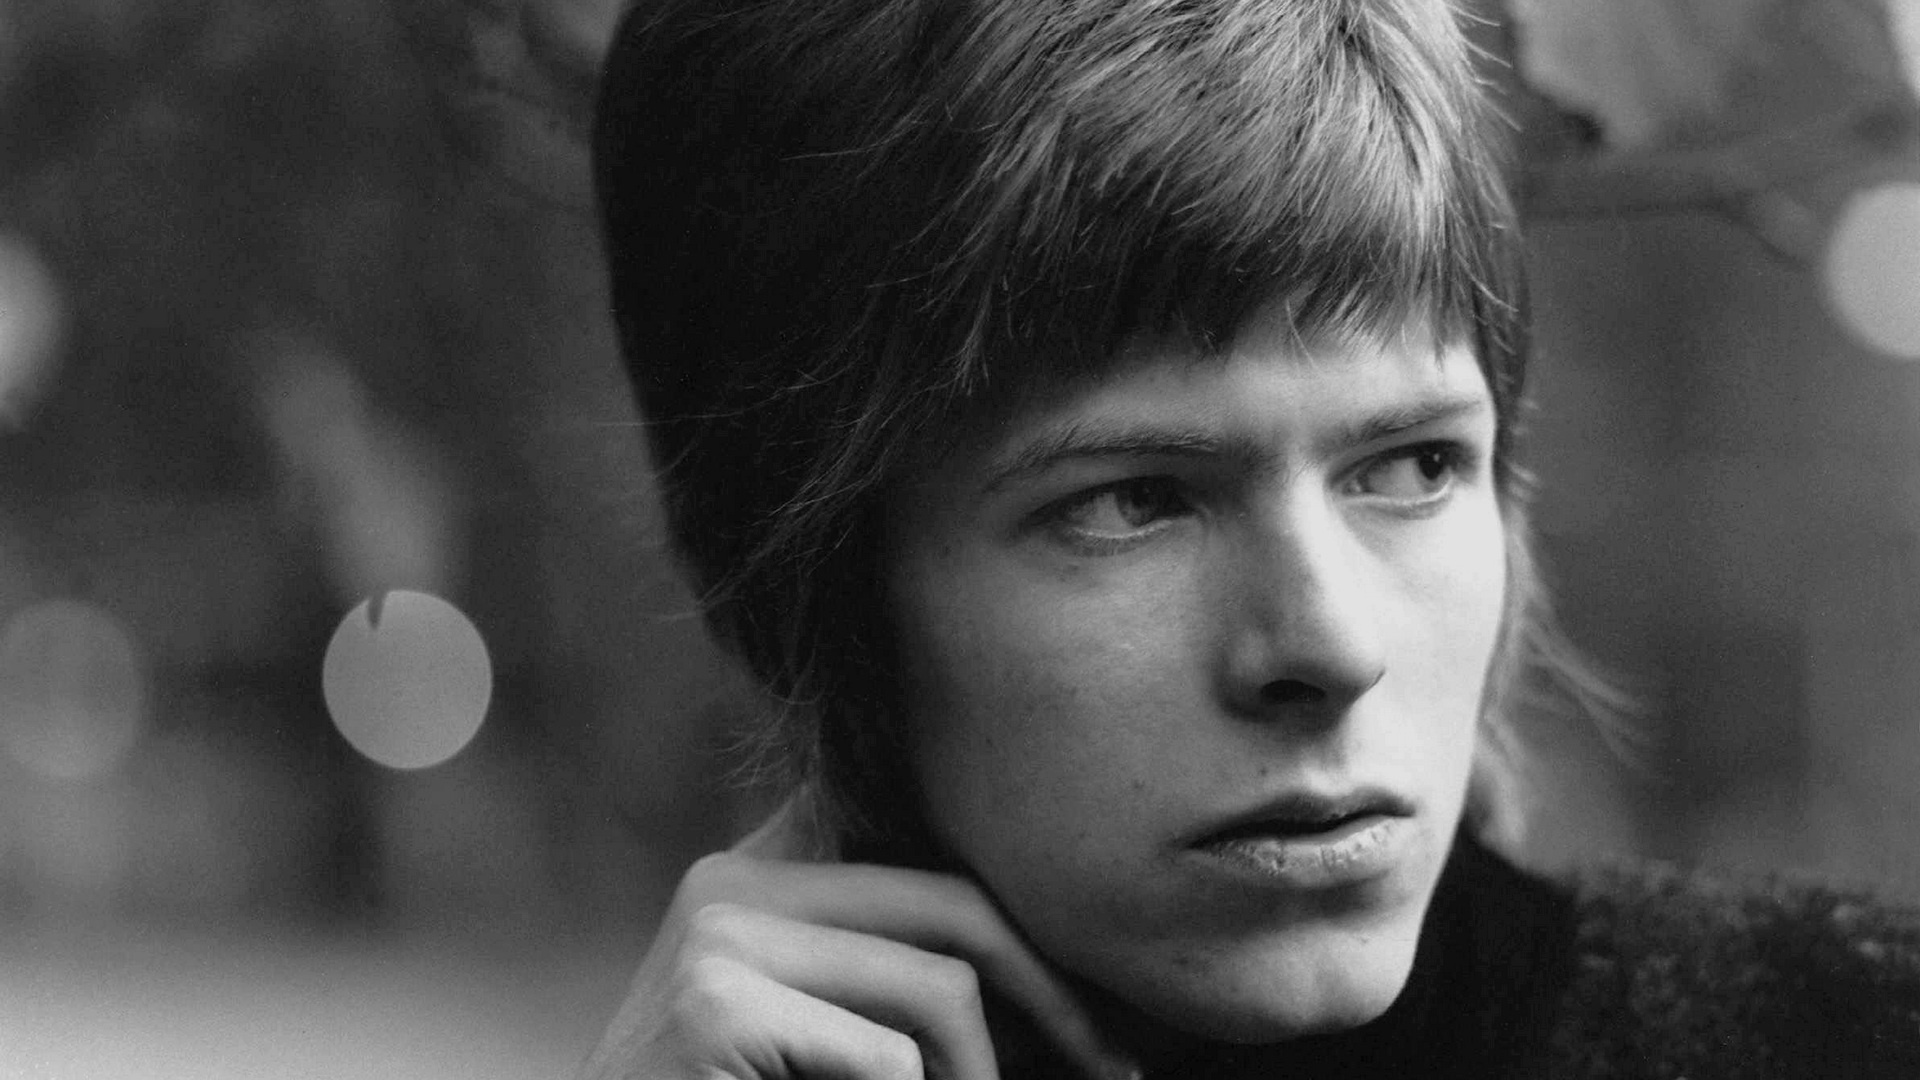 Music David Bowie HD Wallpaper | Background Image